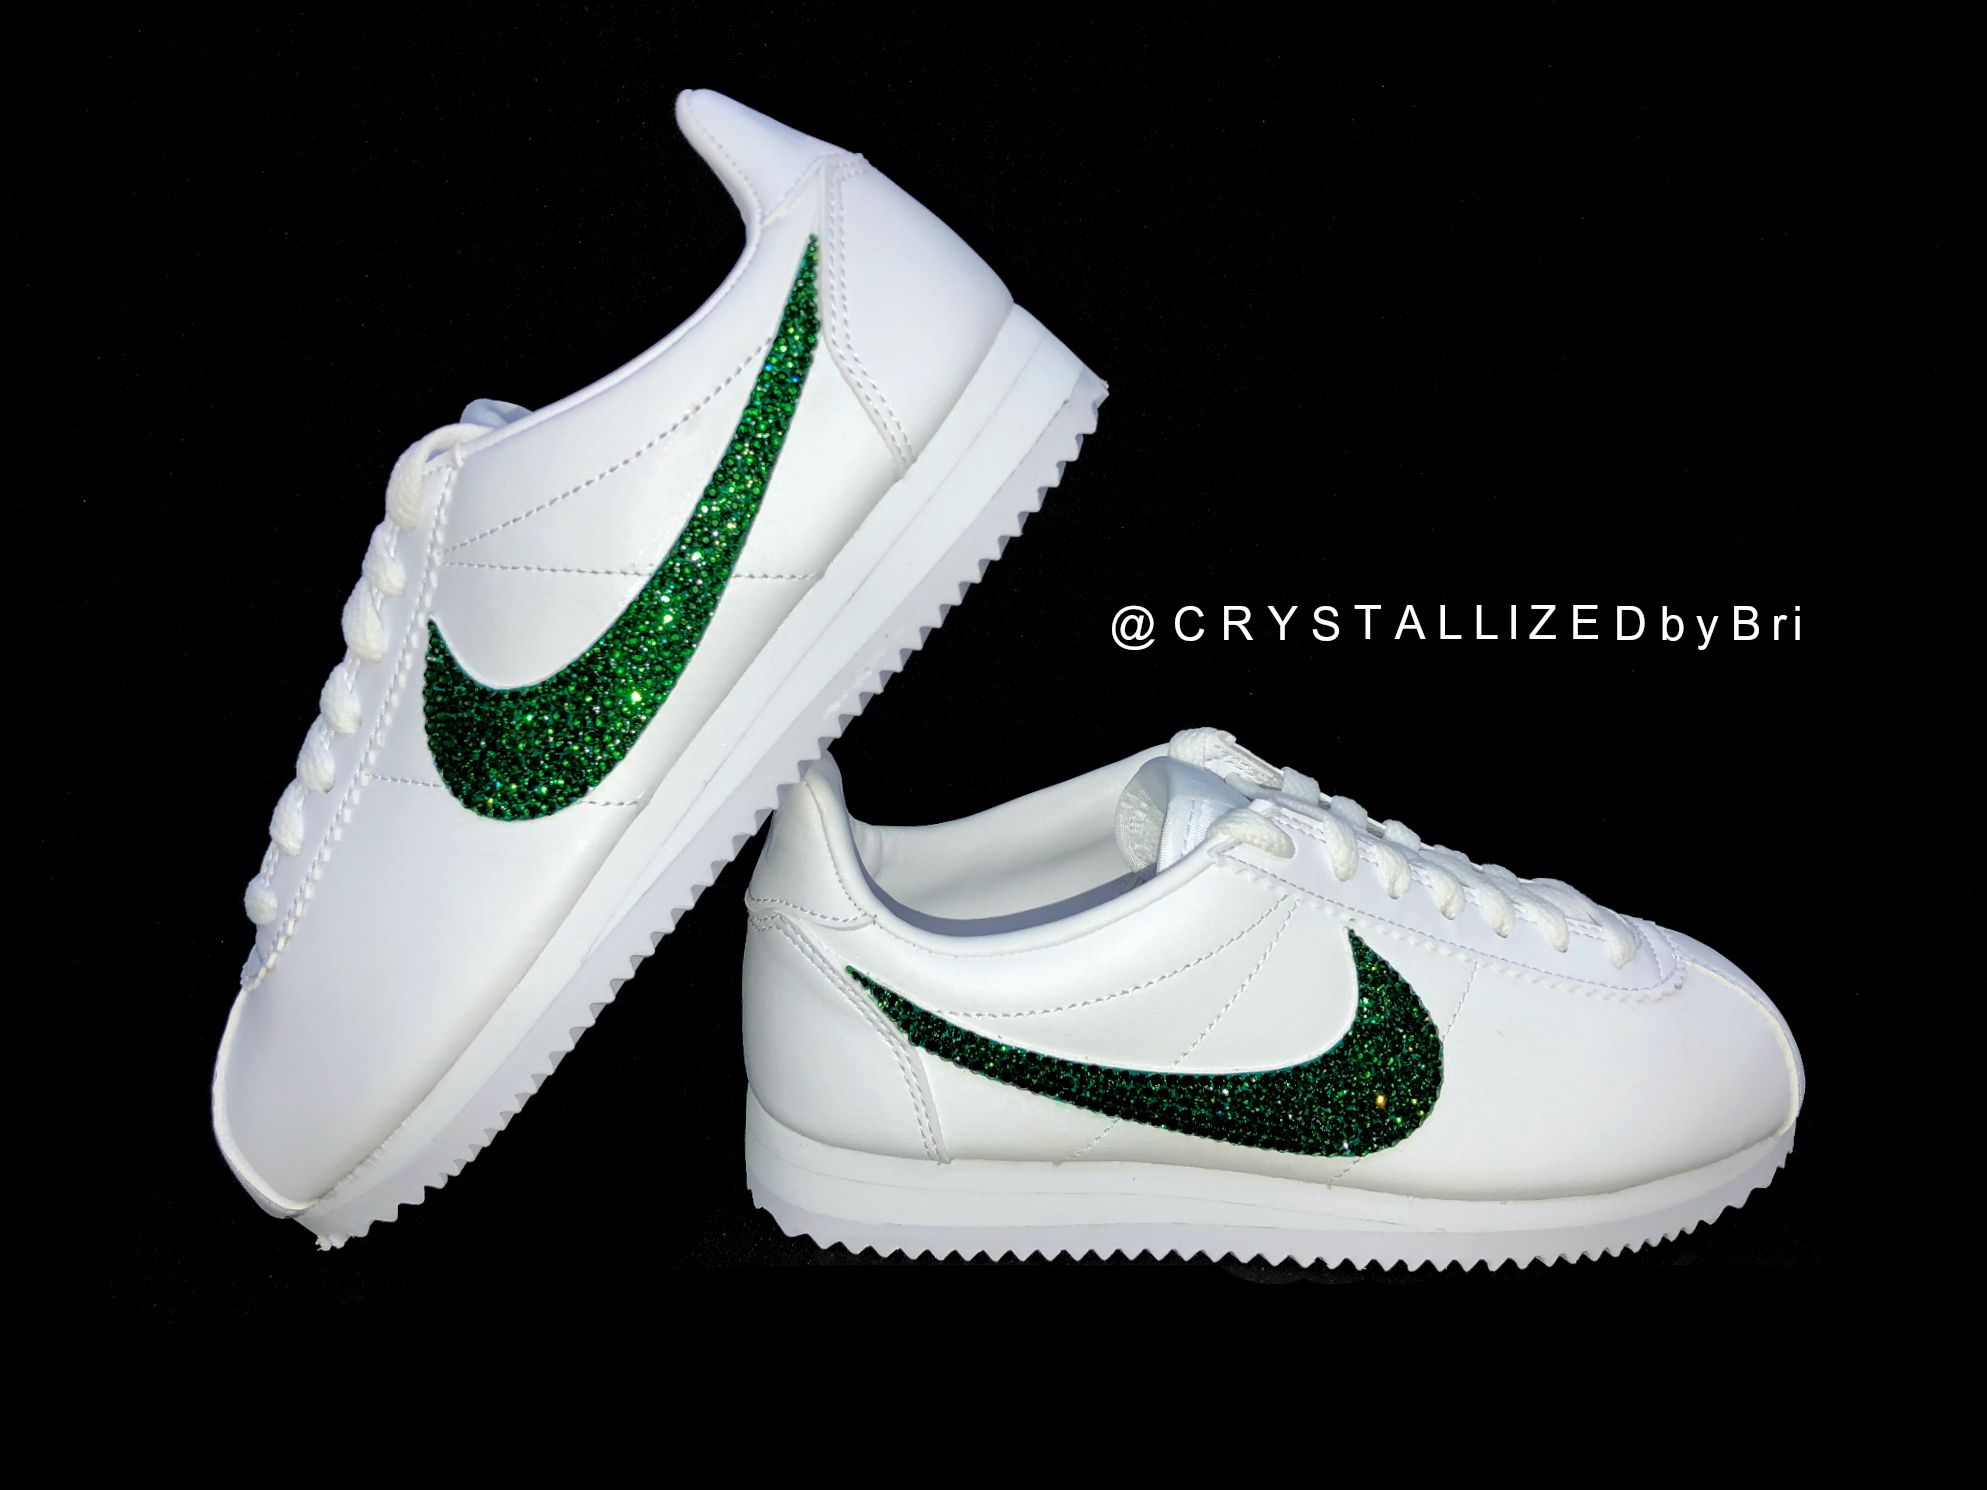 Buy Hand Made Nike Crystallized Classic Cortez Women's Sneakers